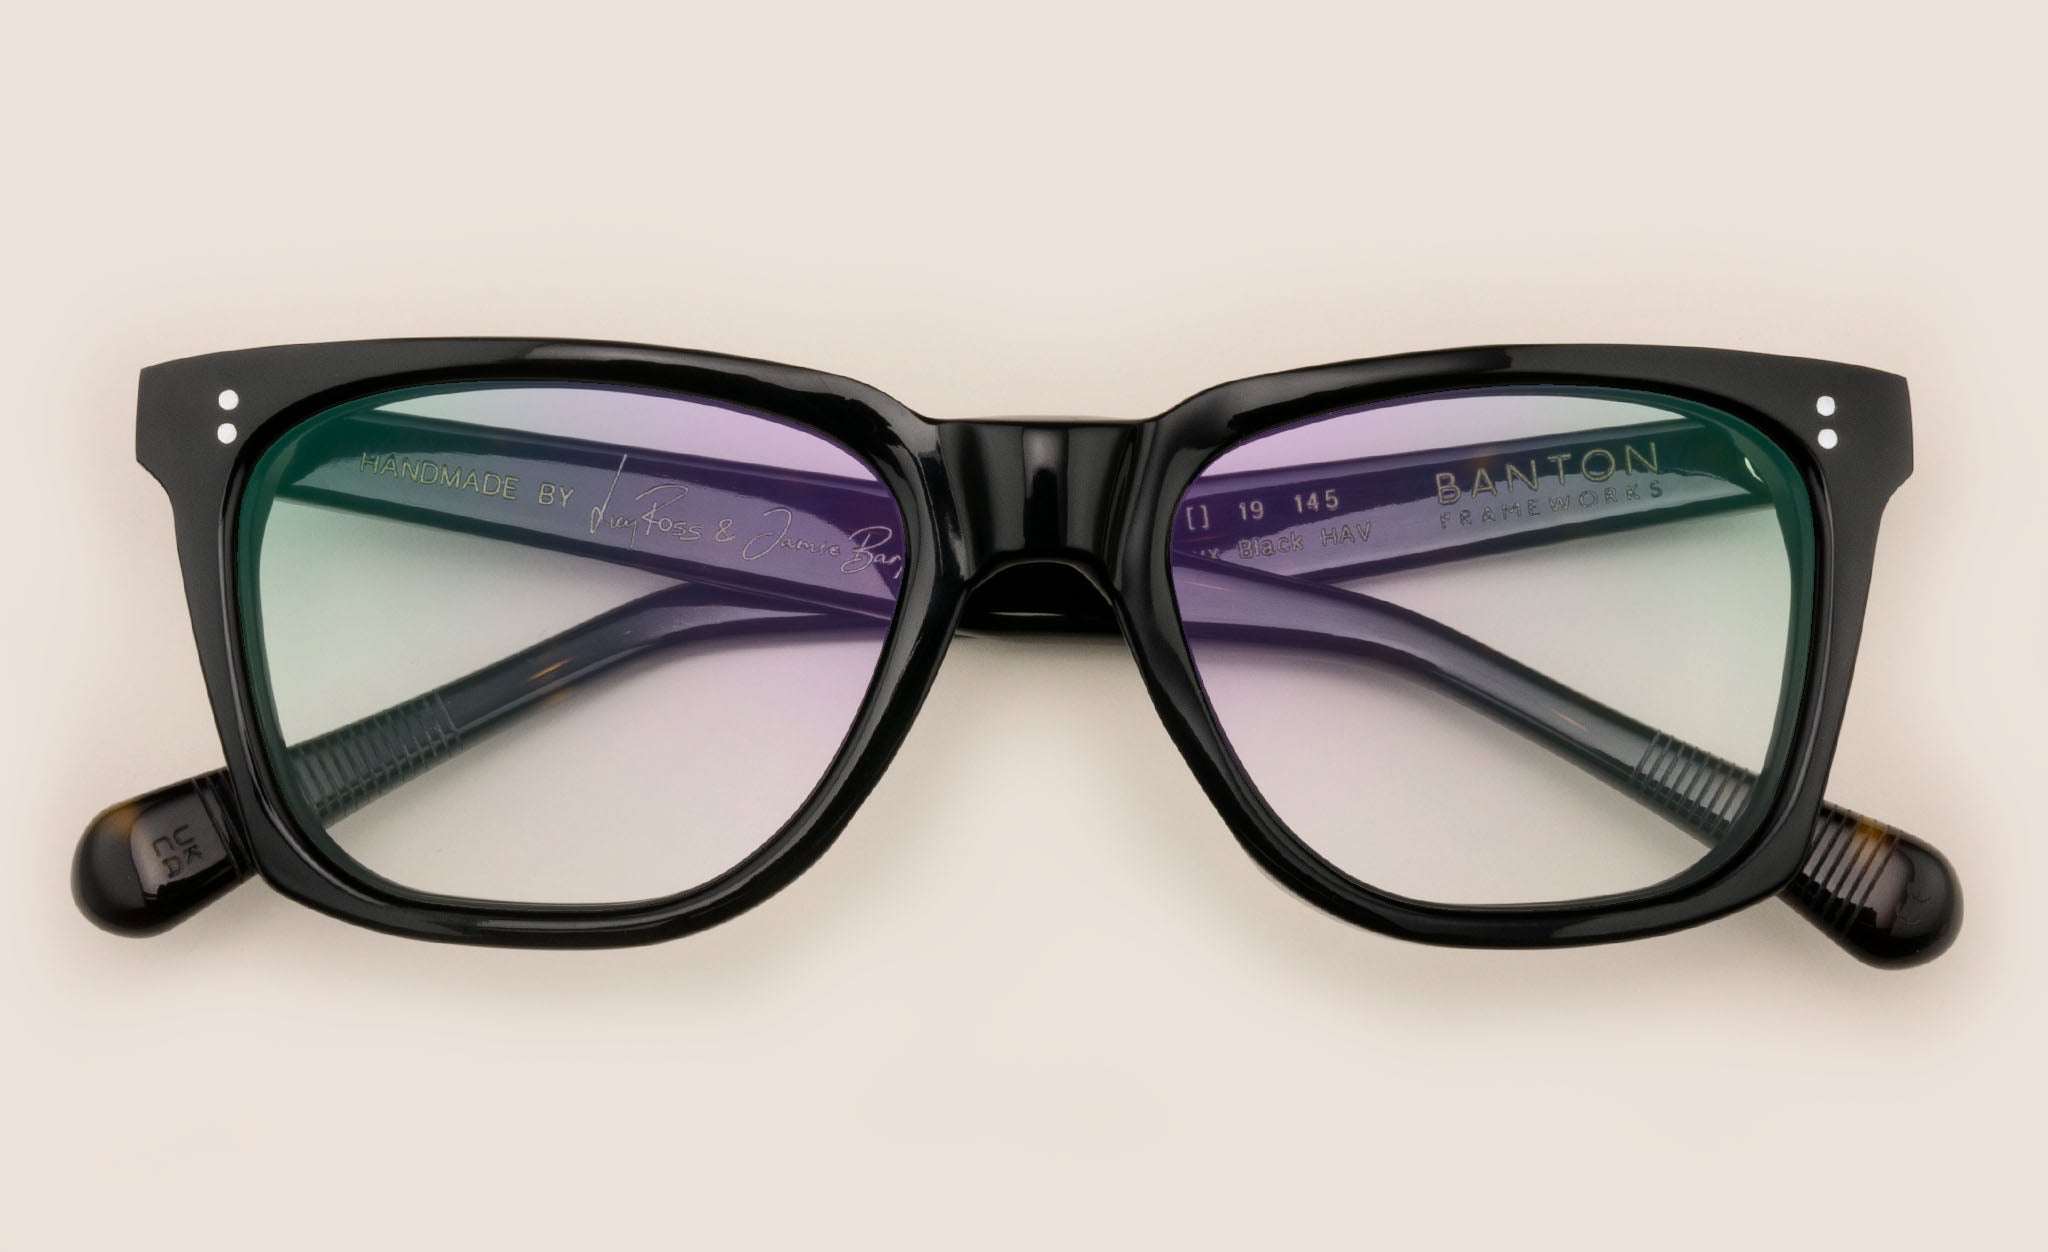 Rectangular black spectacles with Havana pattern temple arms